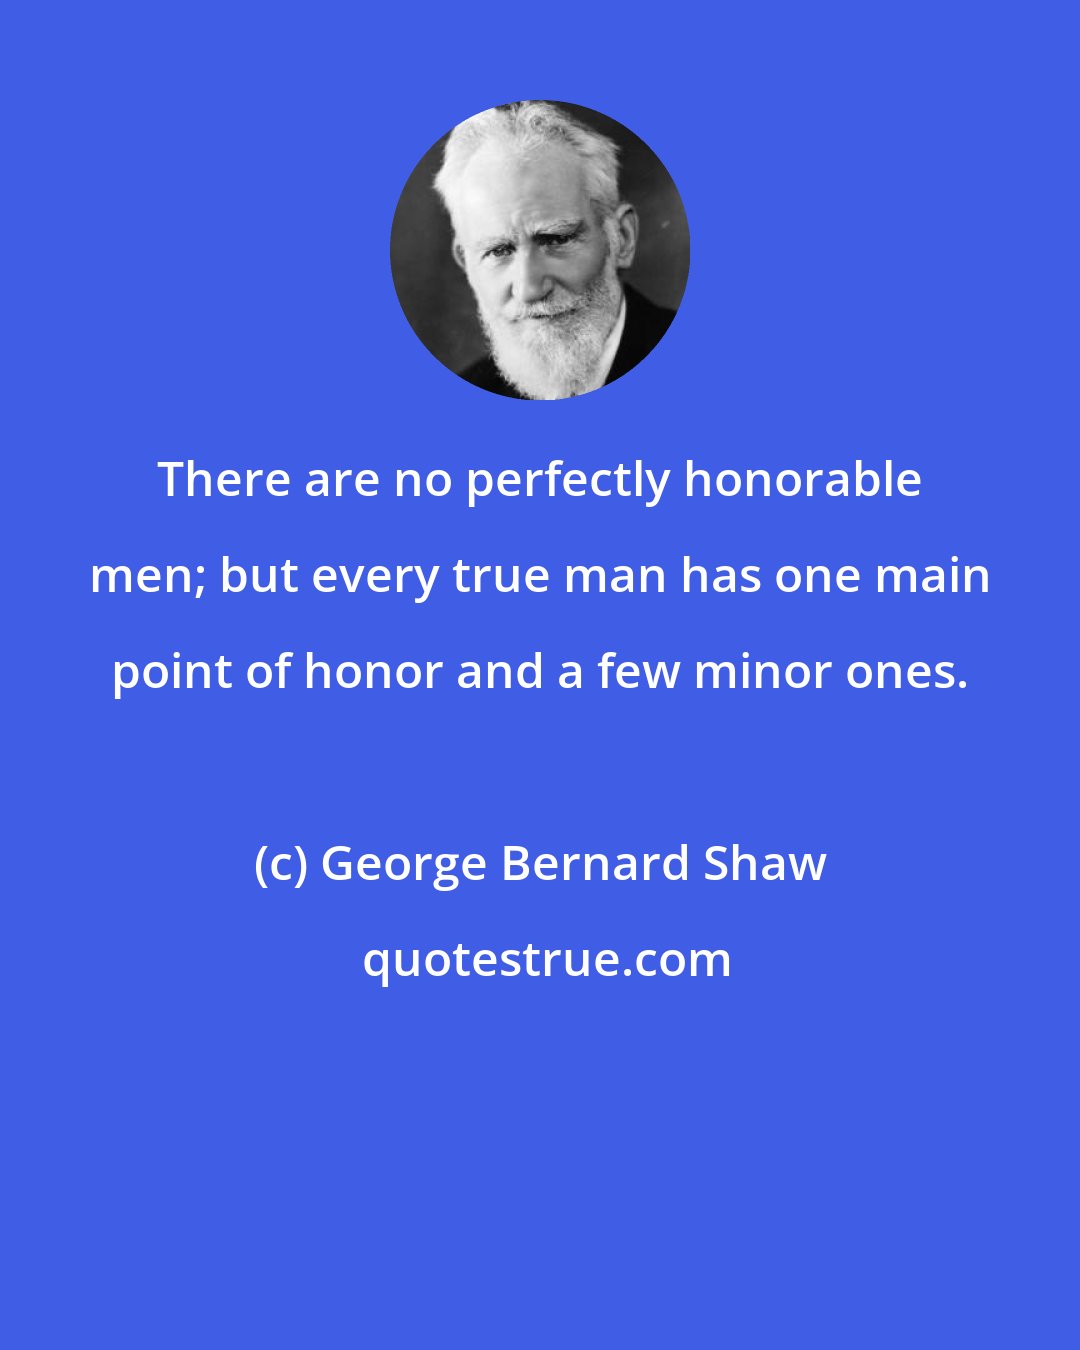 George Bernard Shaw: There are no perfectly honorable men; but every true man has one main point of honor and a few minor ones.